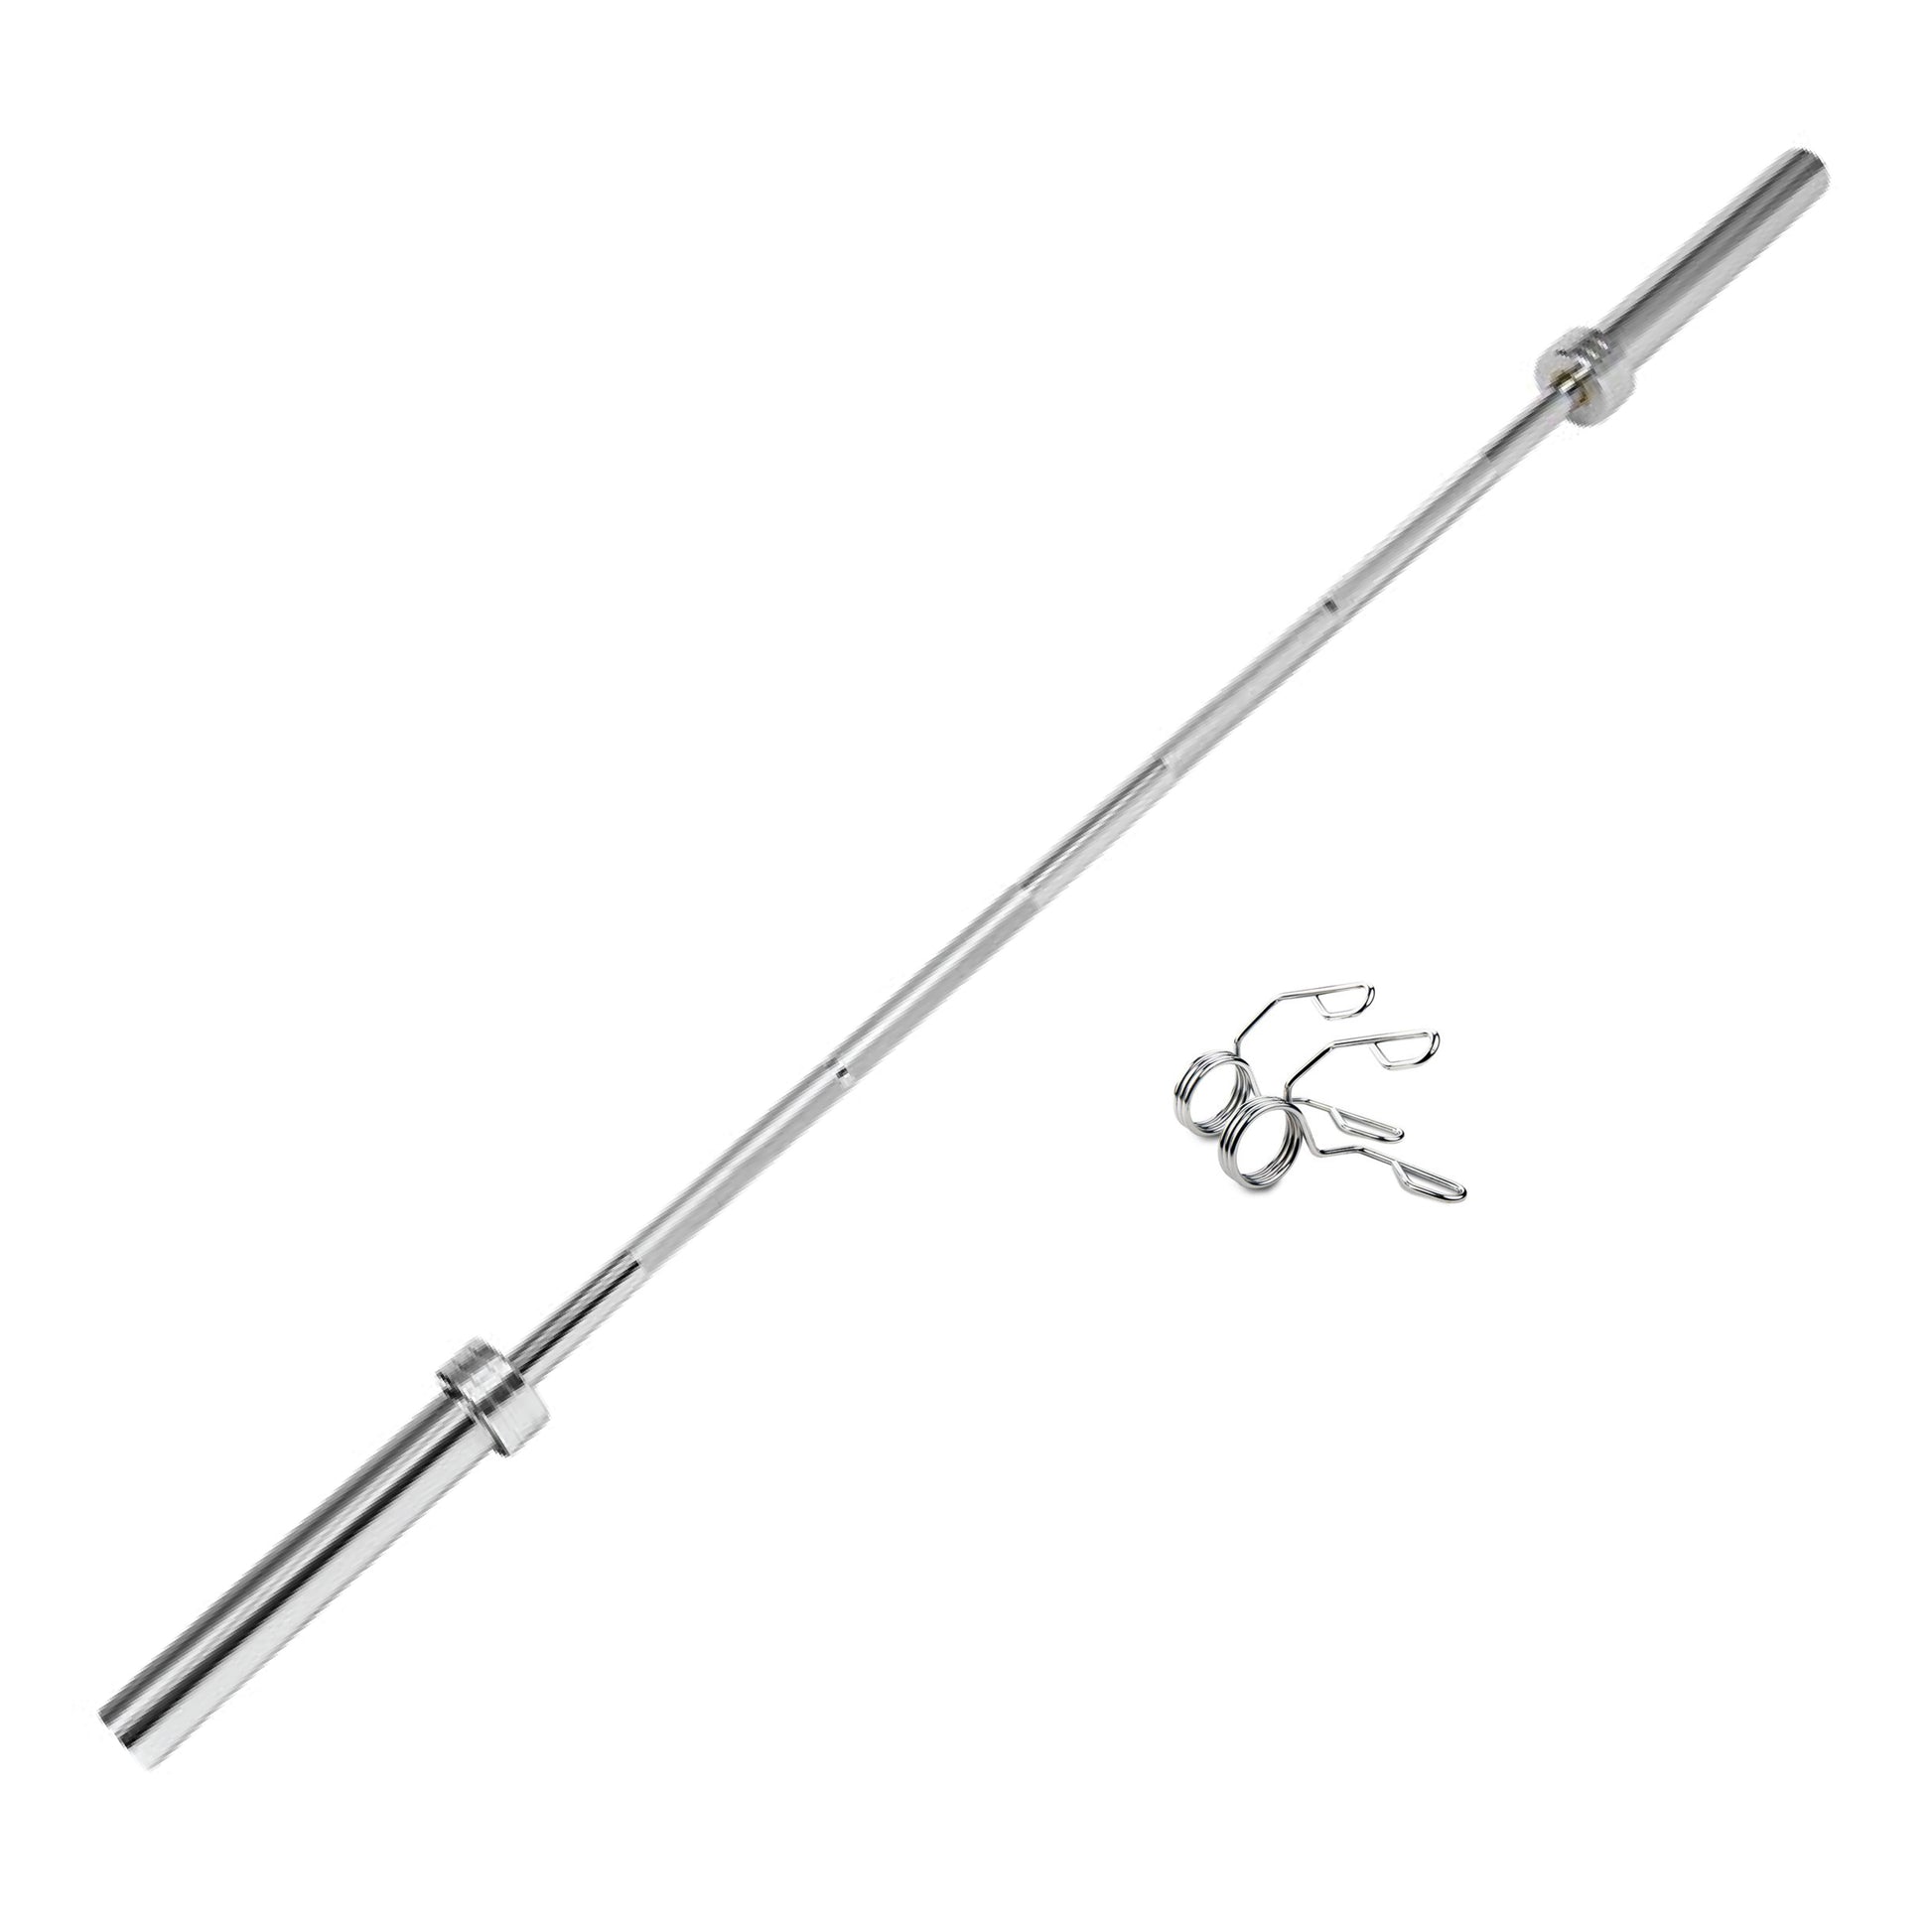  7 ft Olympic Barbell with Collars - 20 Kg